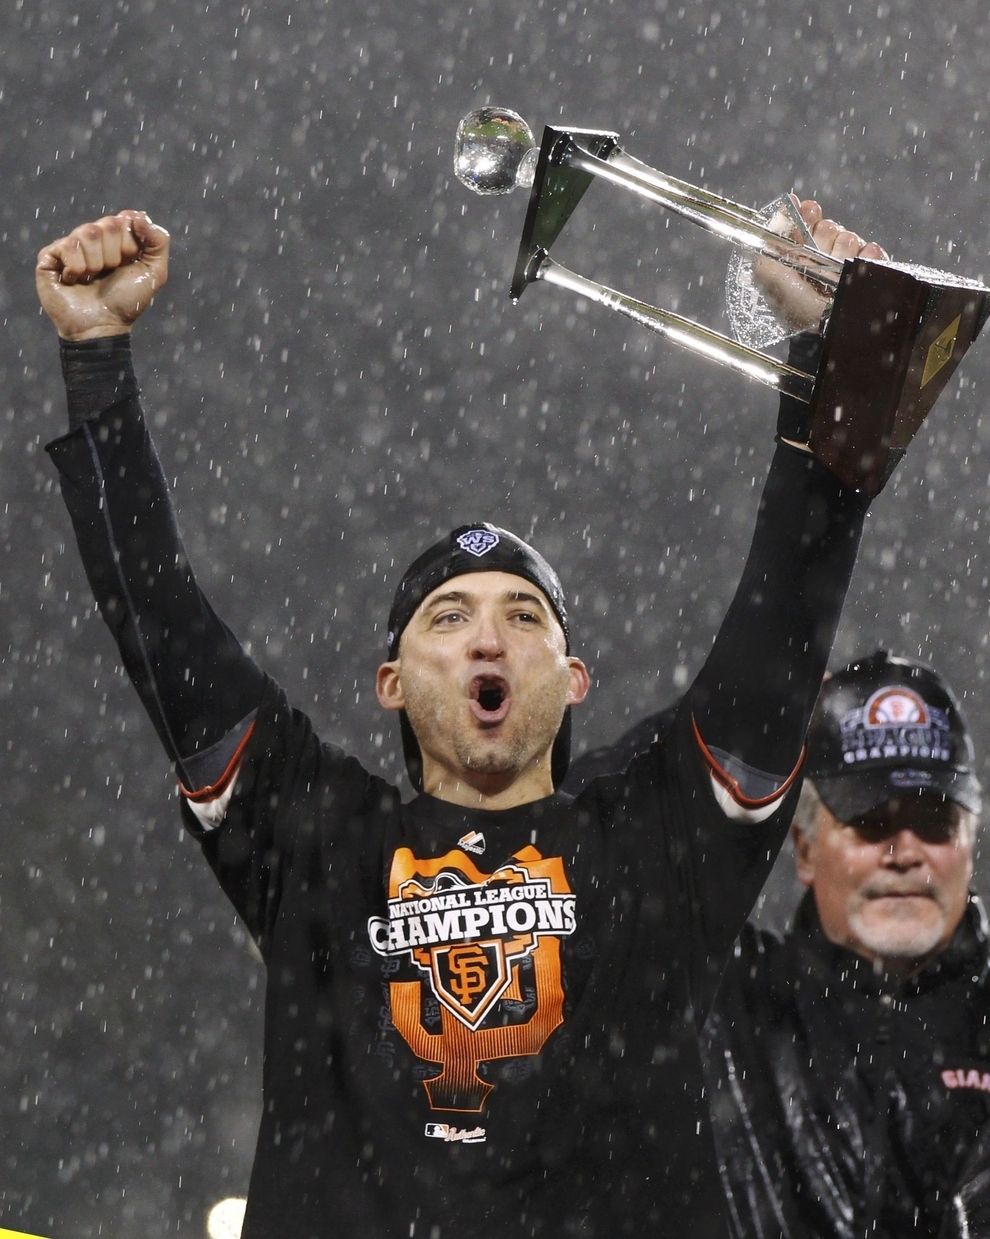 THE GIANTS ARE GOING TO THE WORLD SERIES! AGAIN!